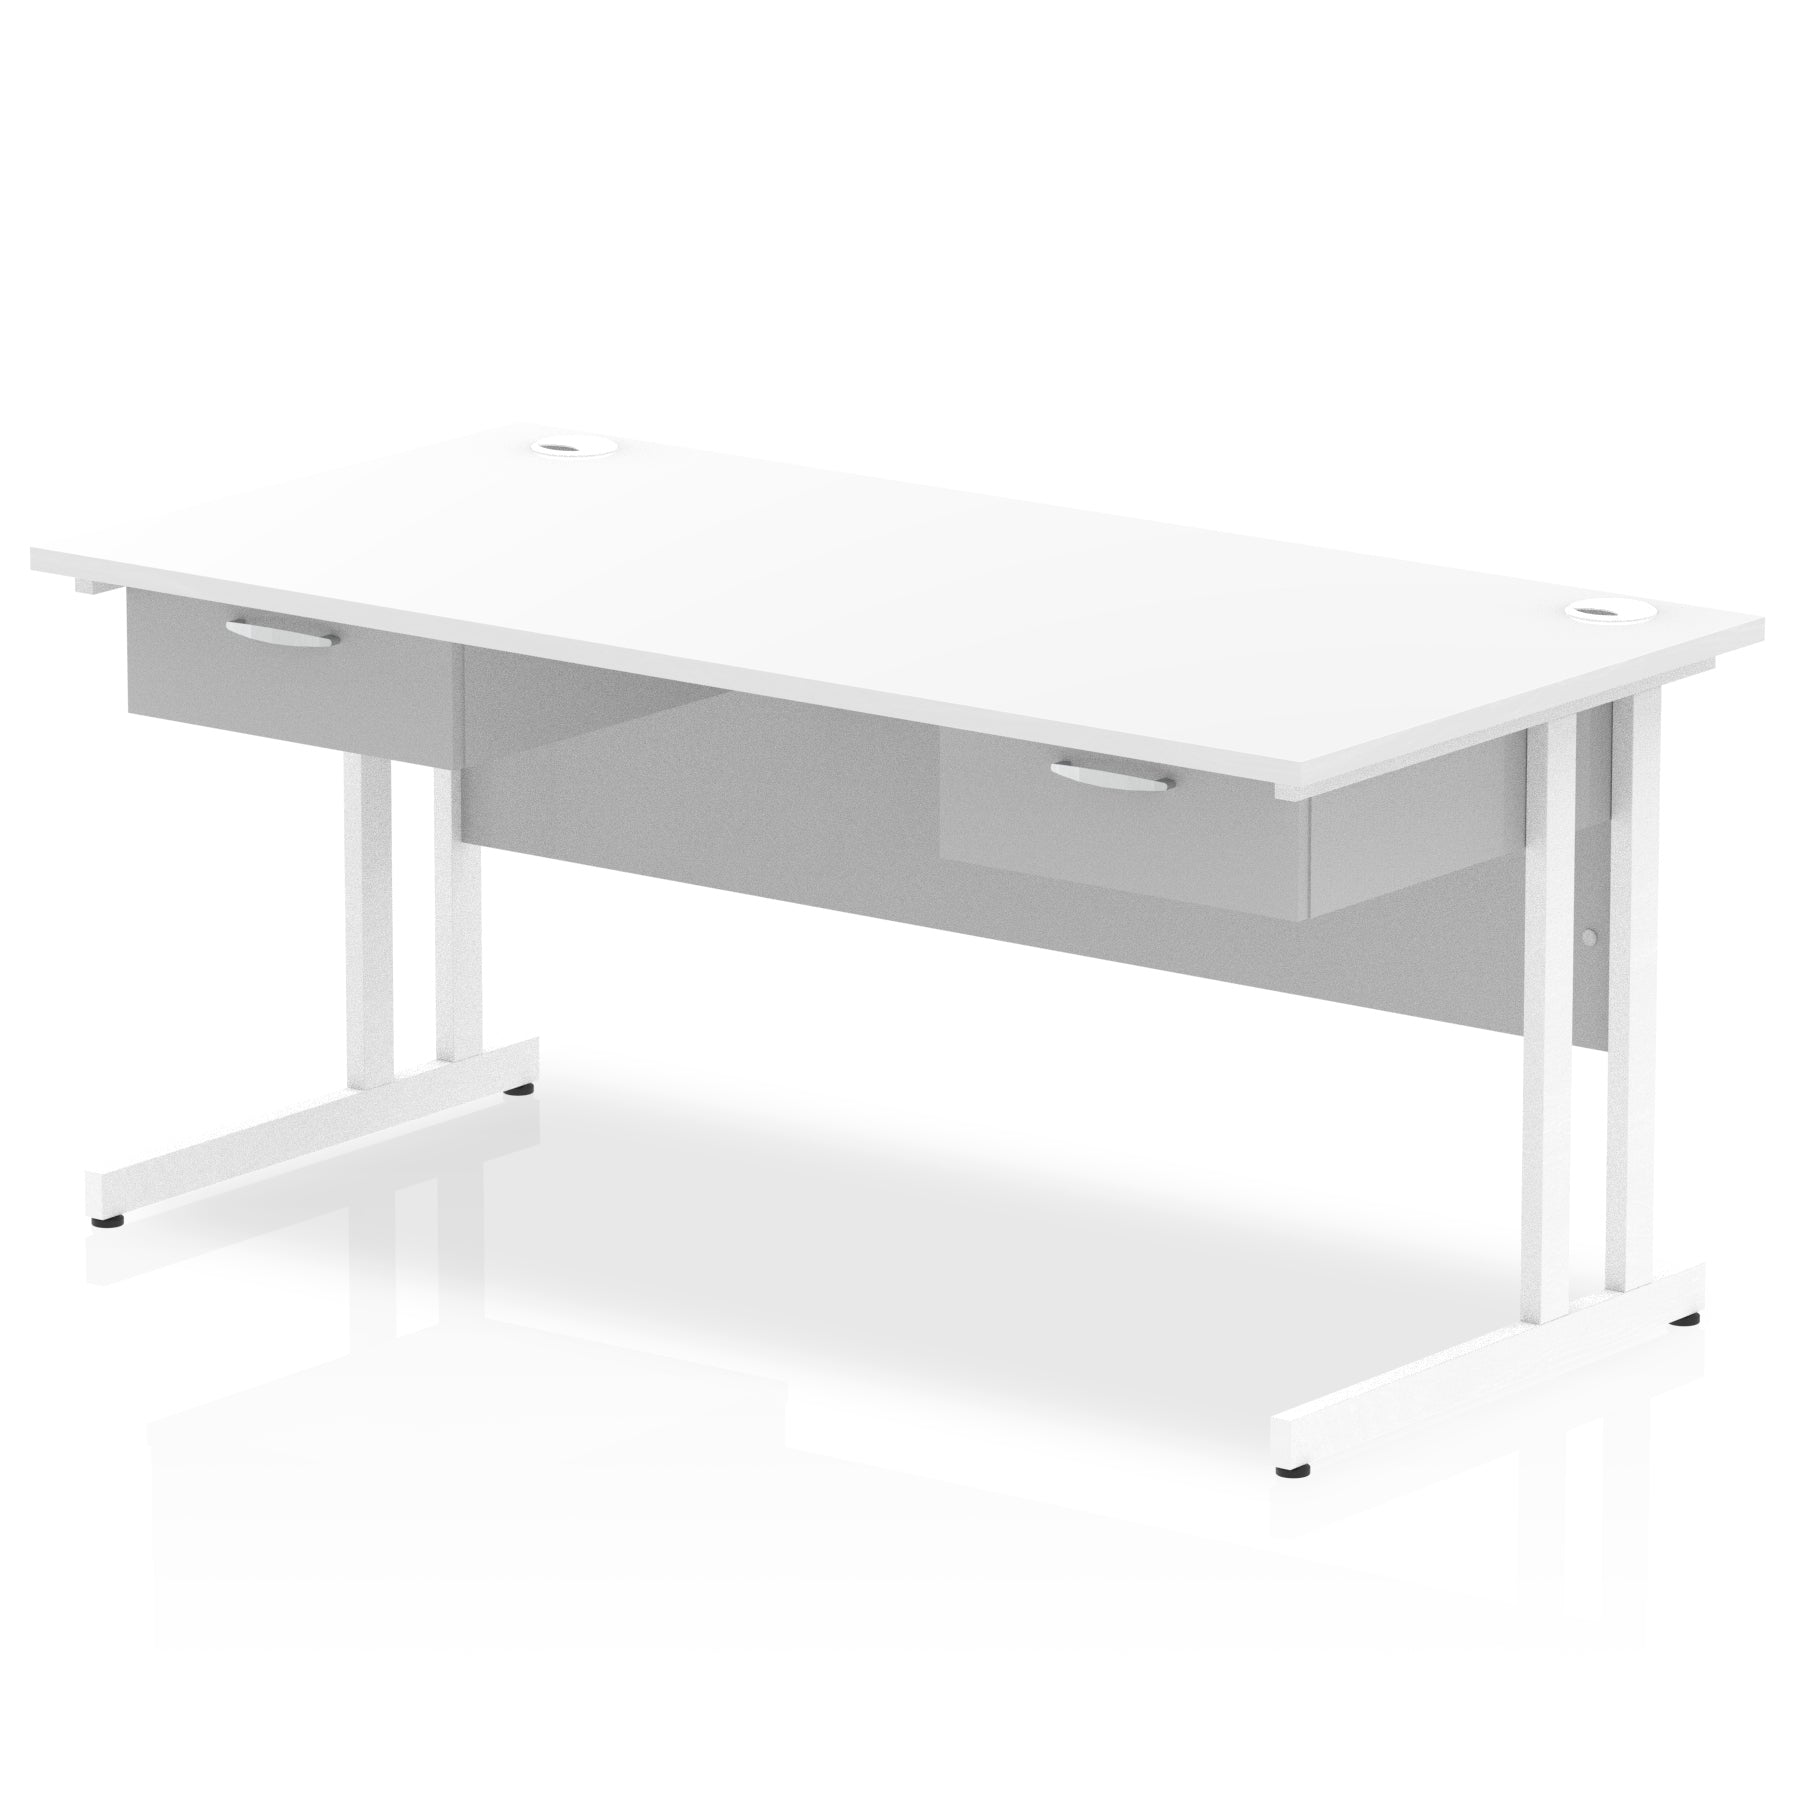 Impulse Cantilever Straight Desk White Frame With Two One Drawer Fixed Pedestals